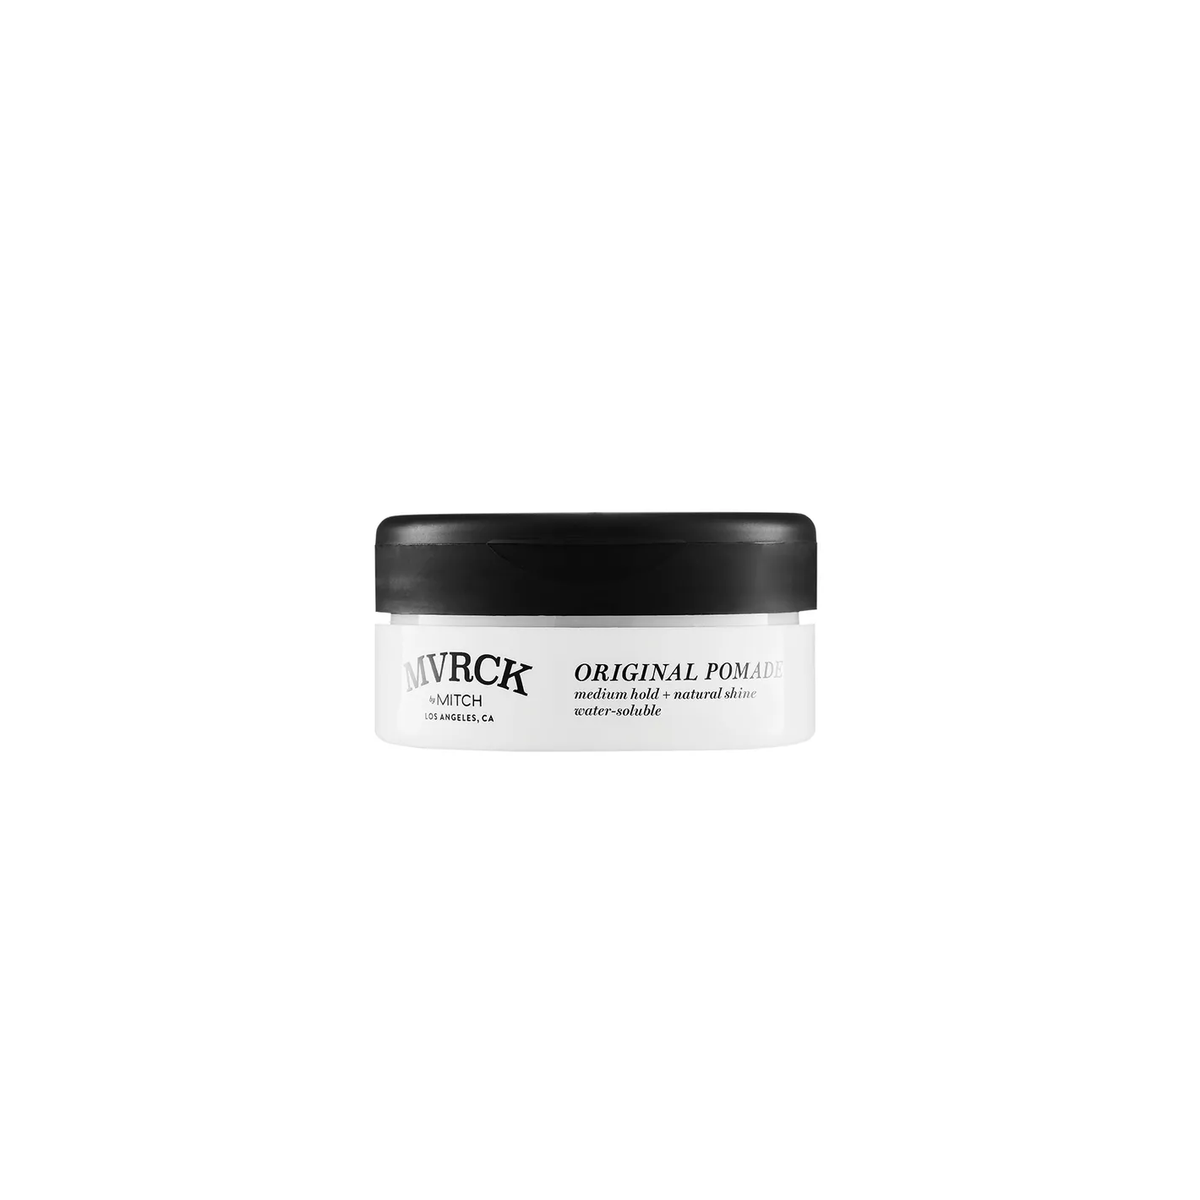 Mvrck Original Pomade - ProCare Outlet by Paul Mitchell